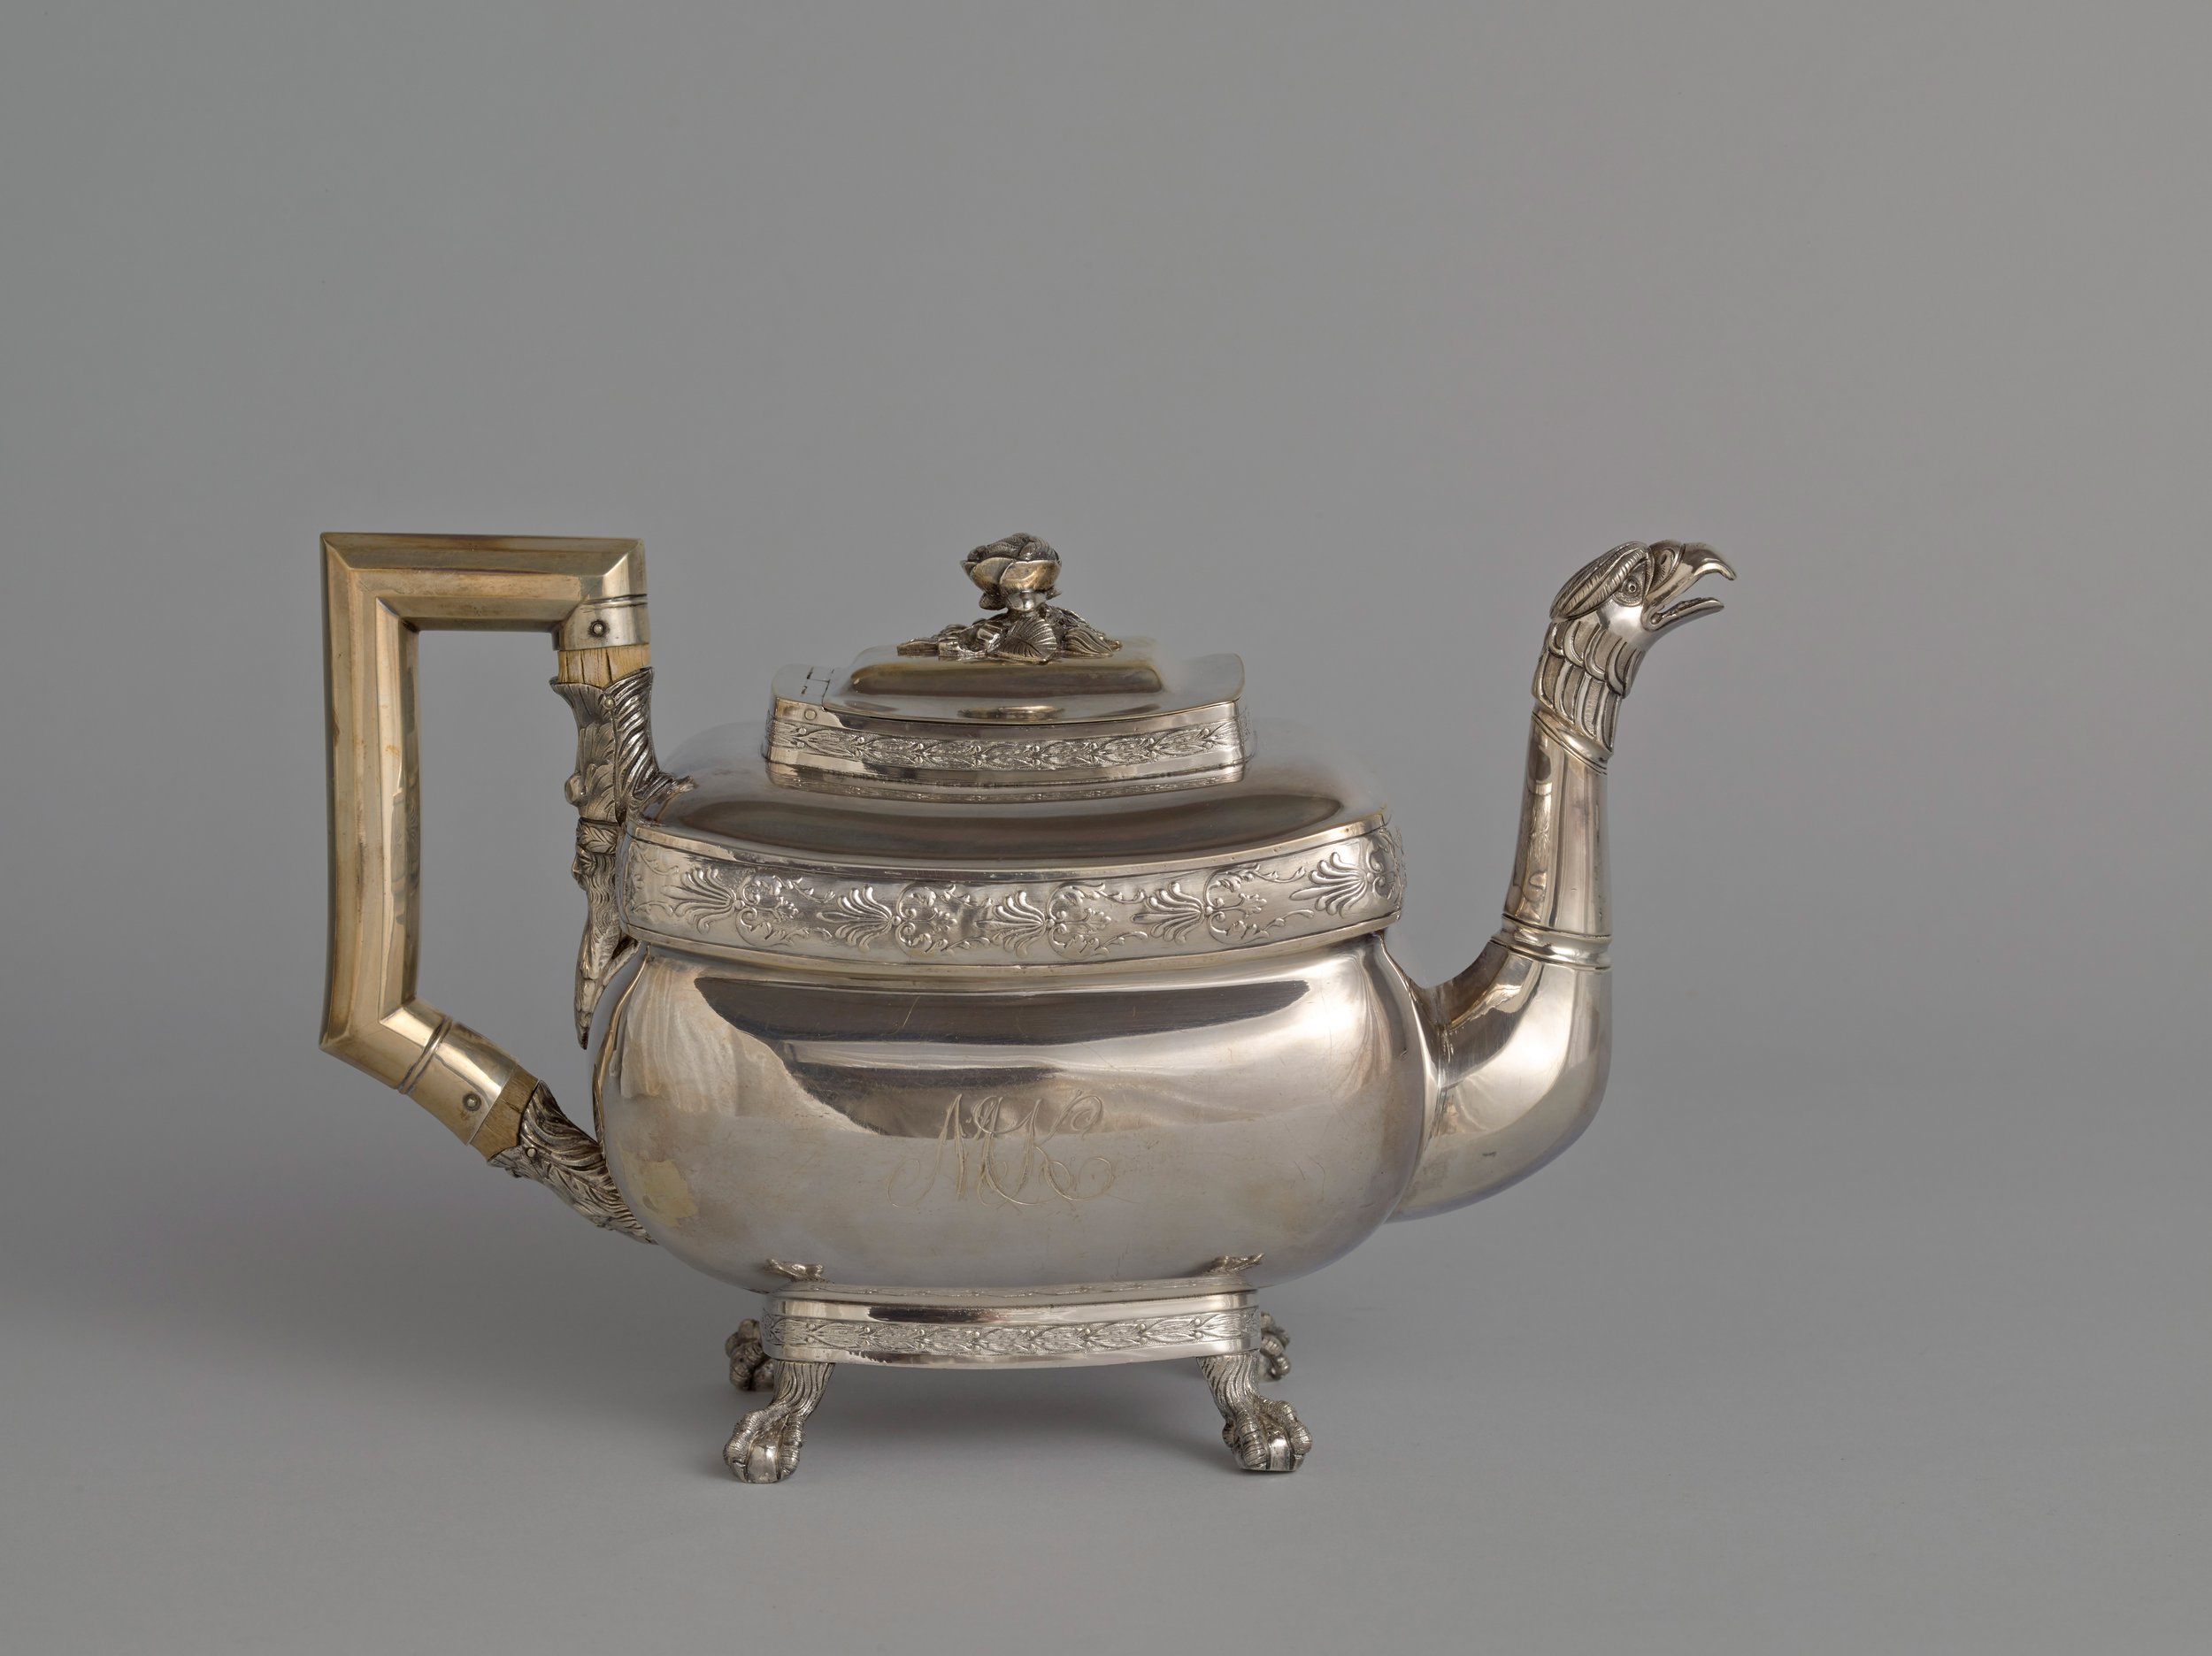   Anthony Rasch and Co.  United States, active 1780–1858  Teapot , 1810–1825 silver, 6 7/8 x 10 9/16 x 4 1/2 inches Museum purchase with support from Friends of the Collection, 1985.5 